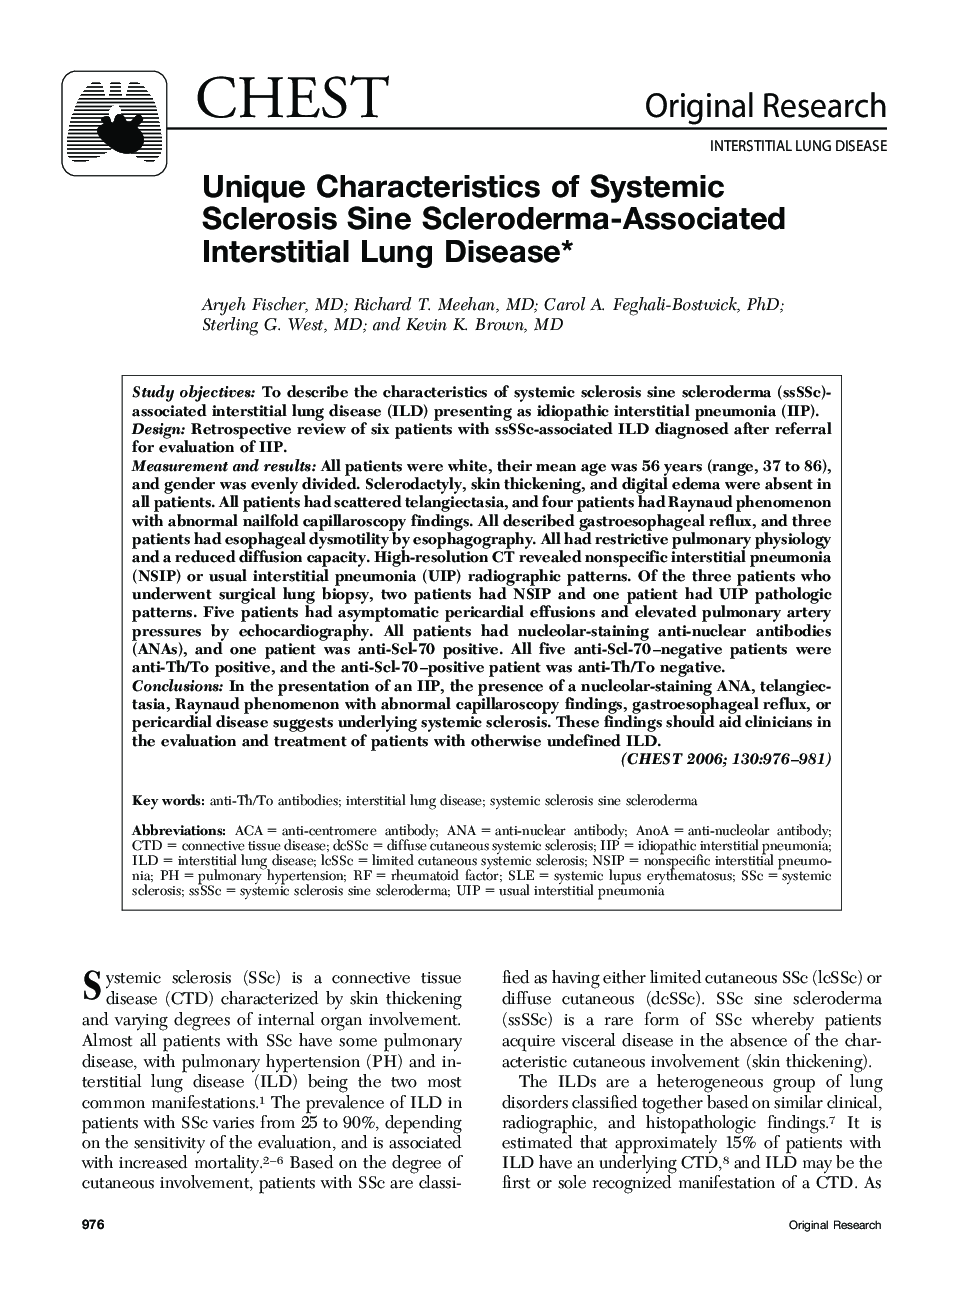 Unique Characteristics of Systemic Sclerosis Sine Scleroderma-Associated Interstitial Lung Disease